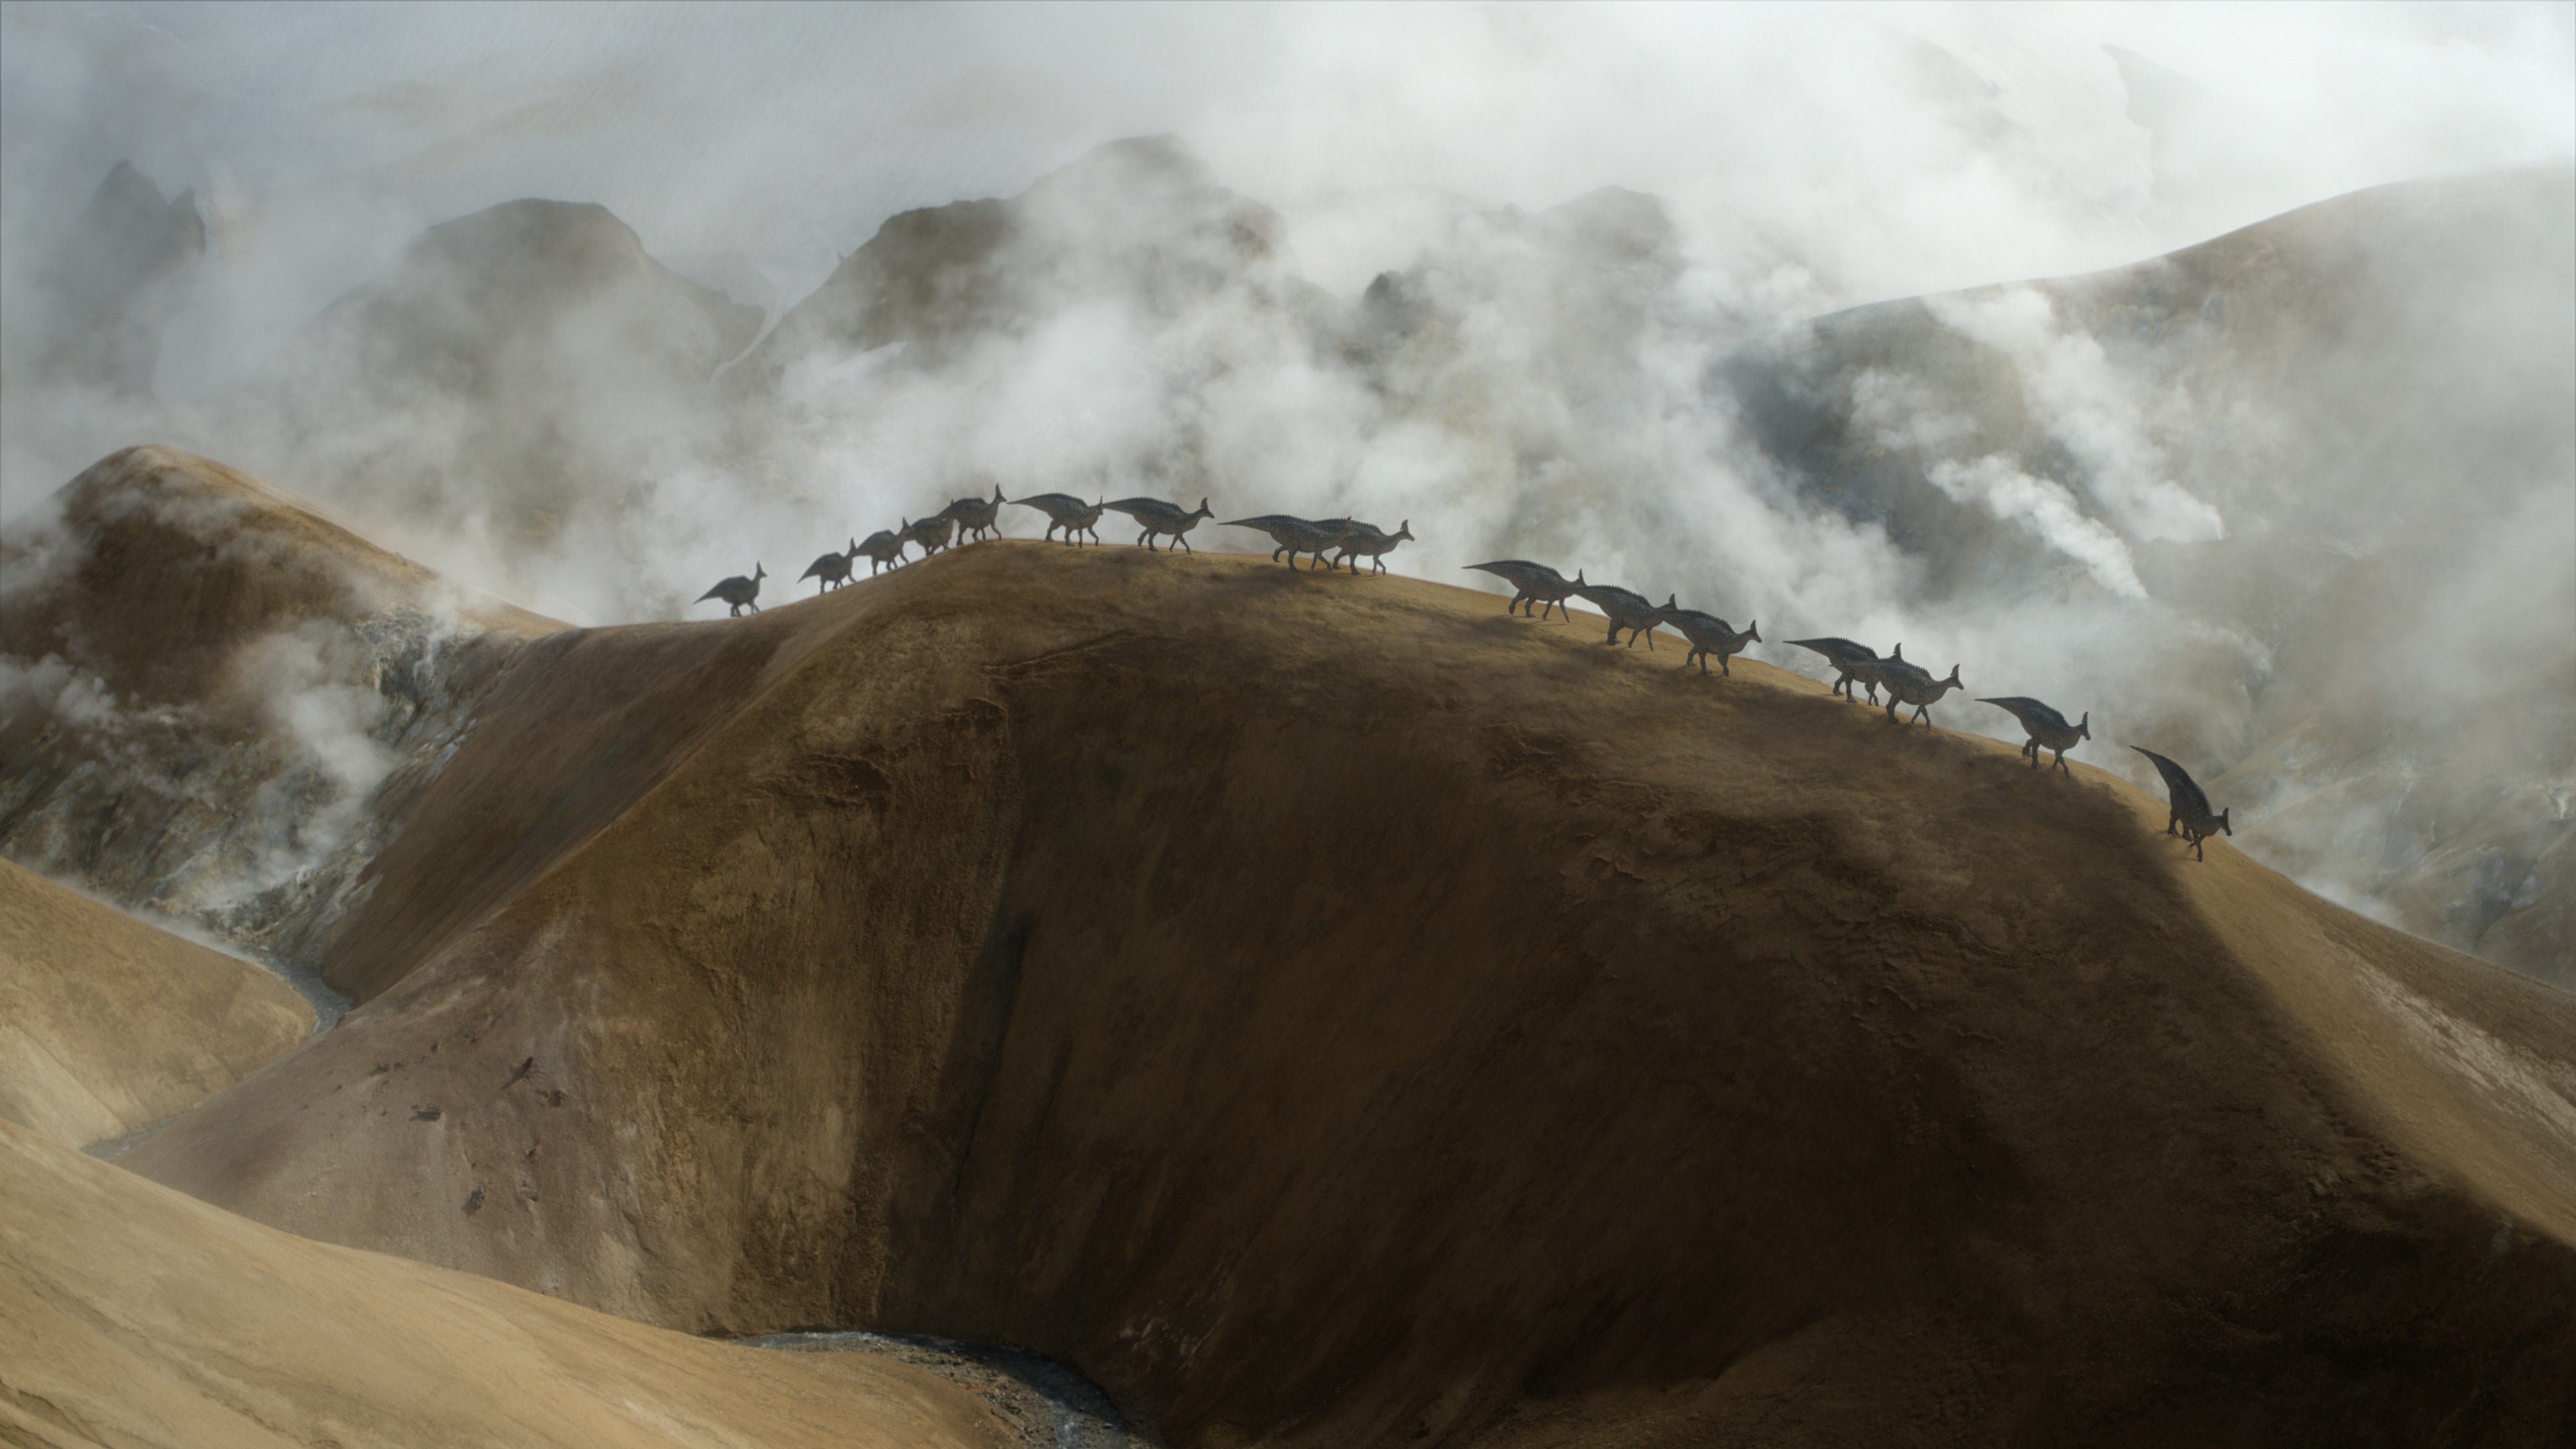 A herd of Olorotitans scaling a large dune. (Image: Apple)